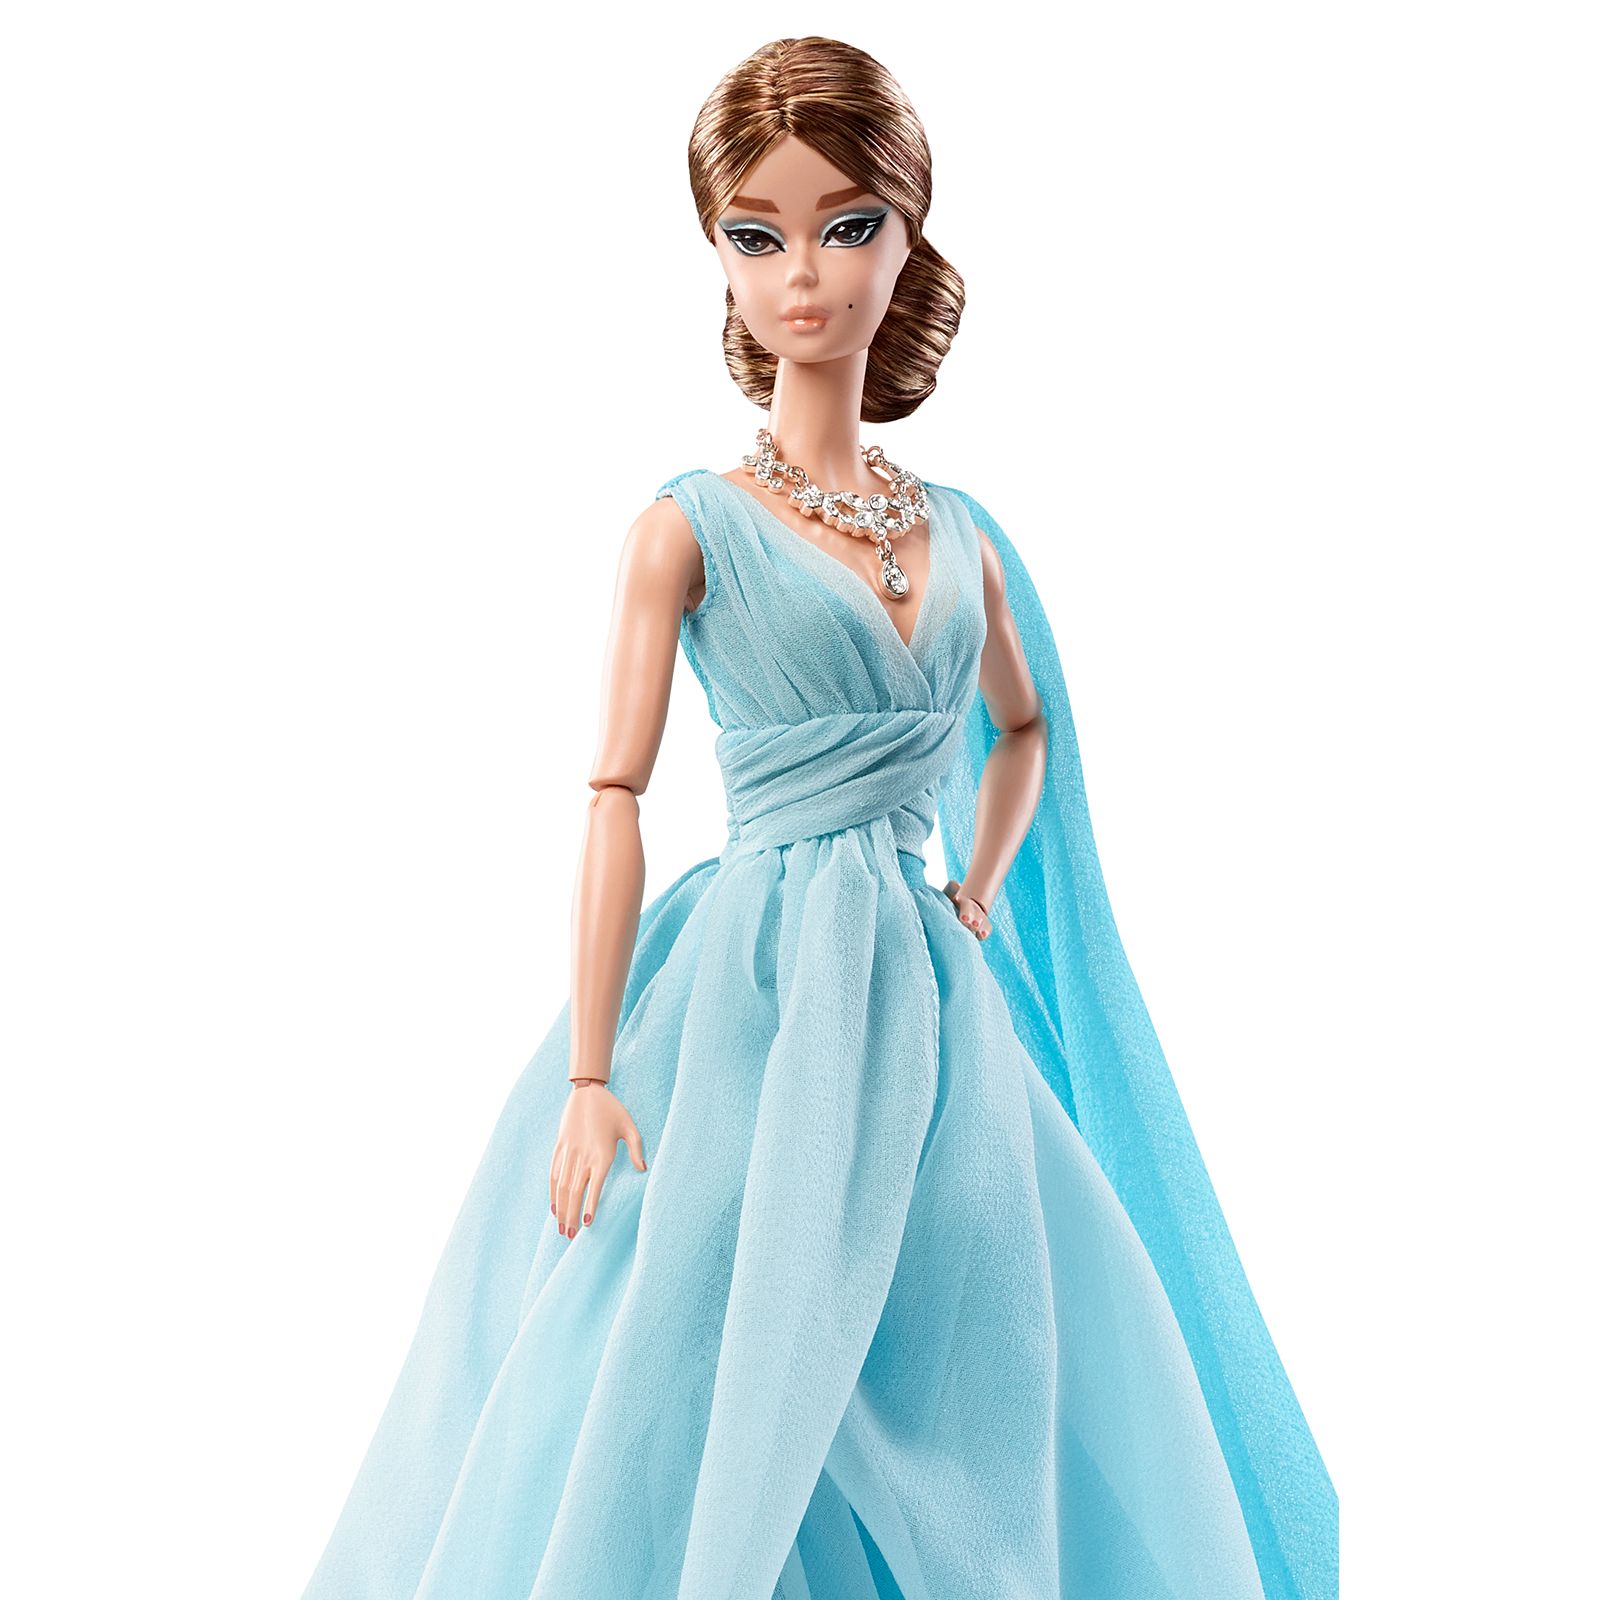 barbie in blue gown